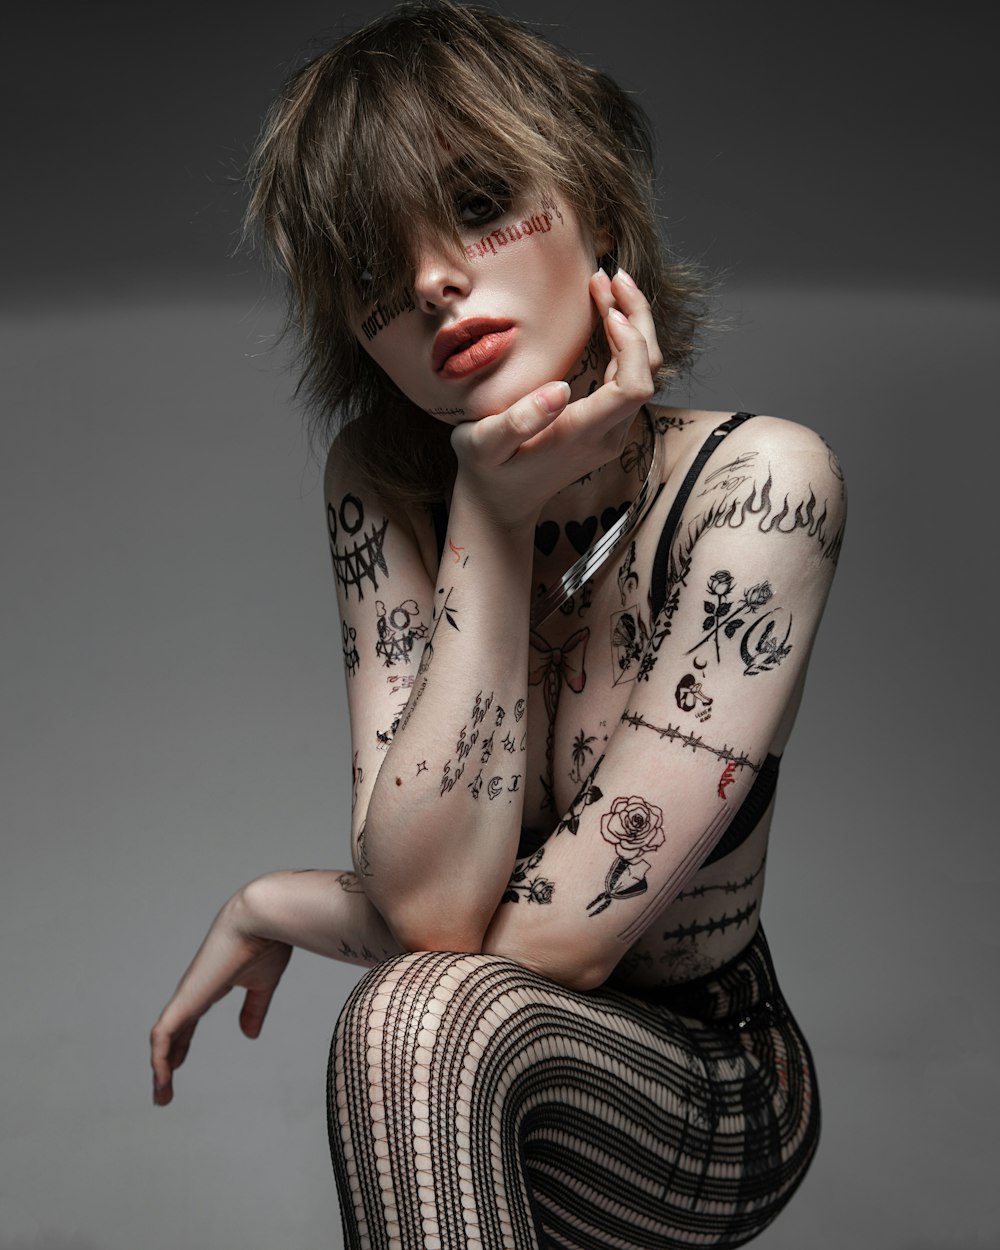 a woman with tattoos on her body posing for a picture